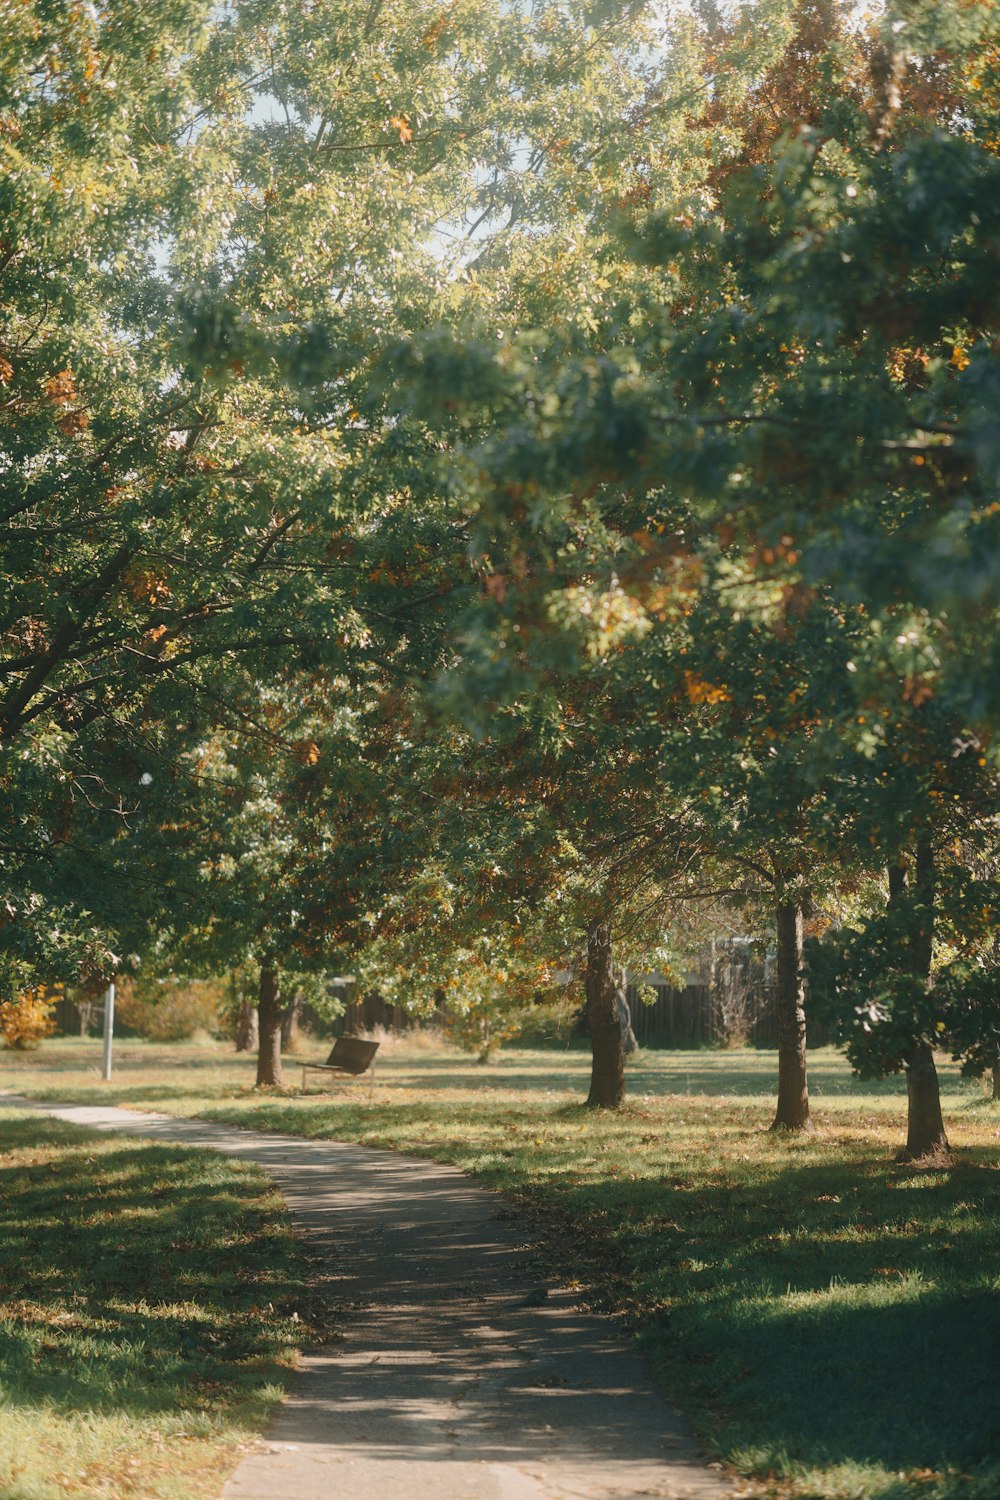 a path through a park lined with trees